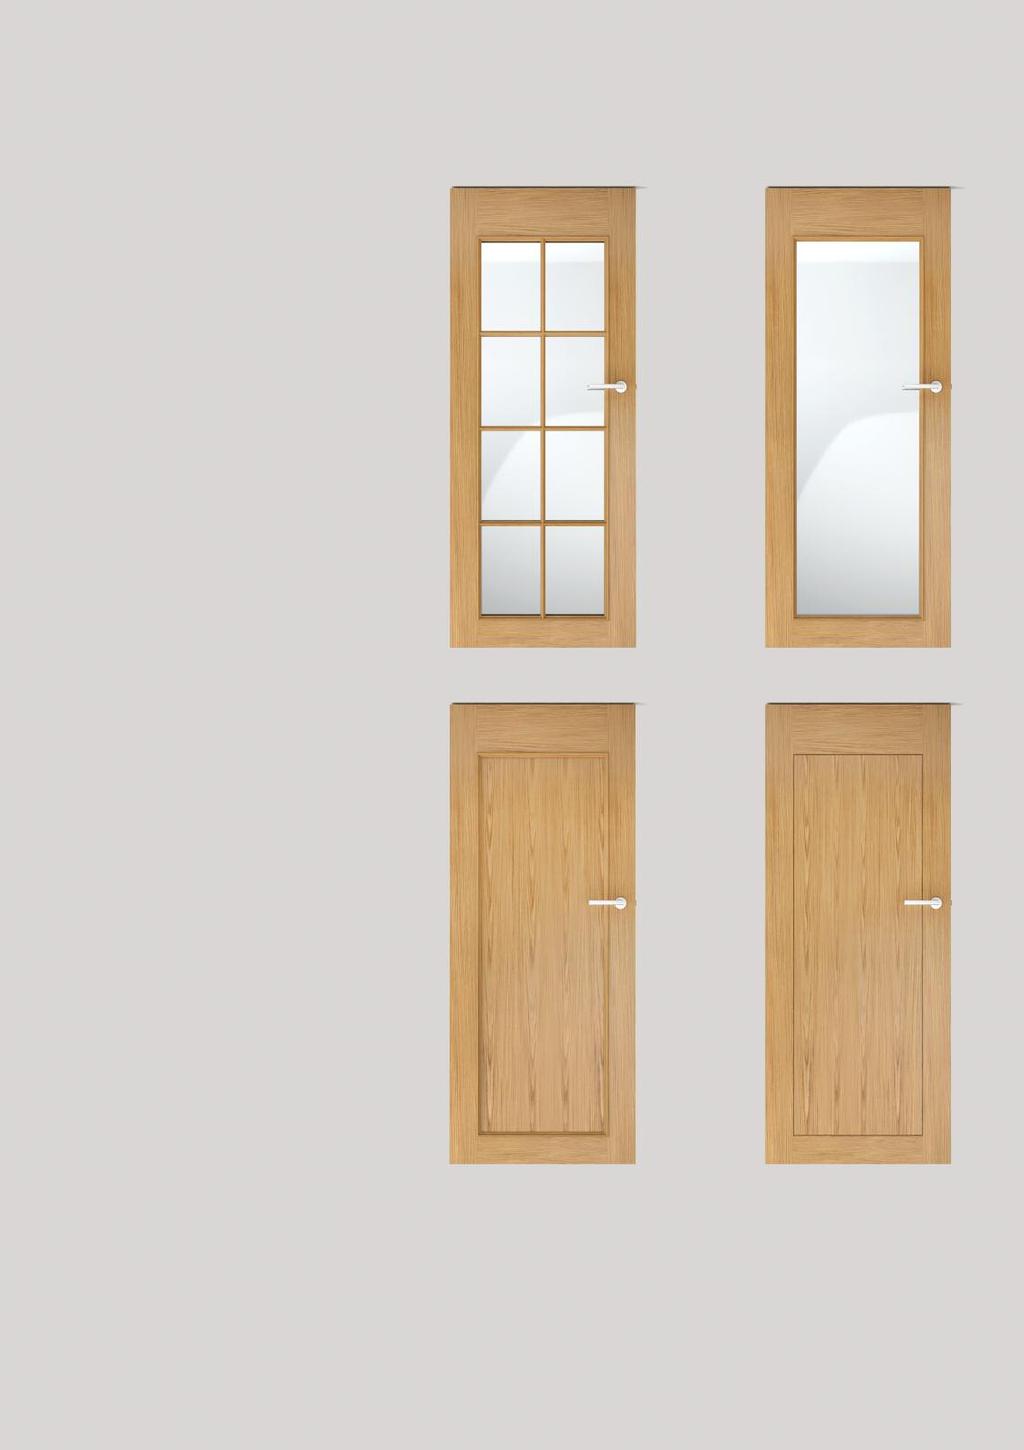 Graefe Trinity A stylish door with an elegant look in a choice of four stunning designs.